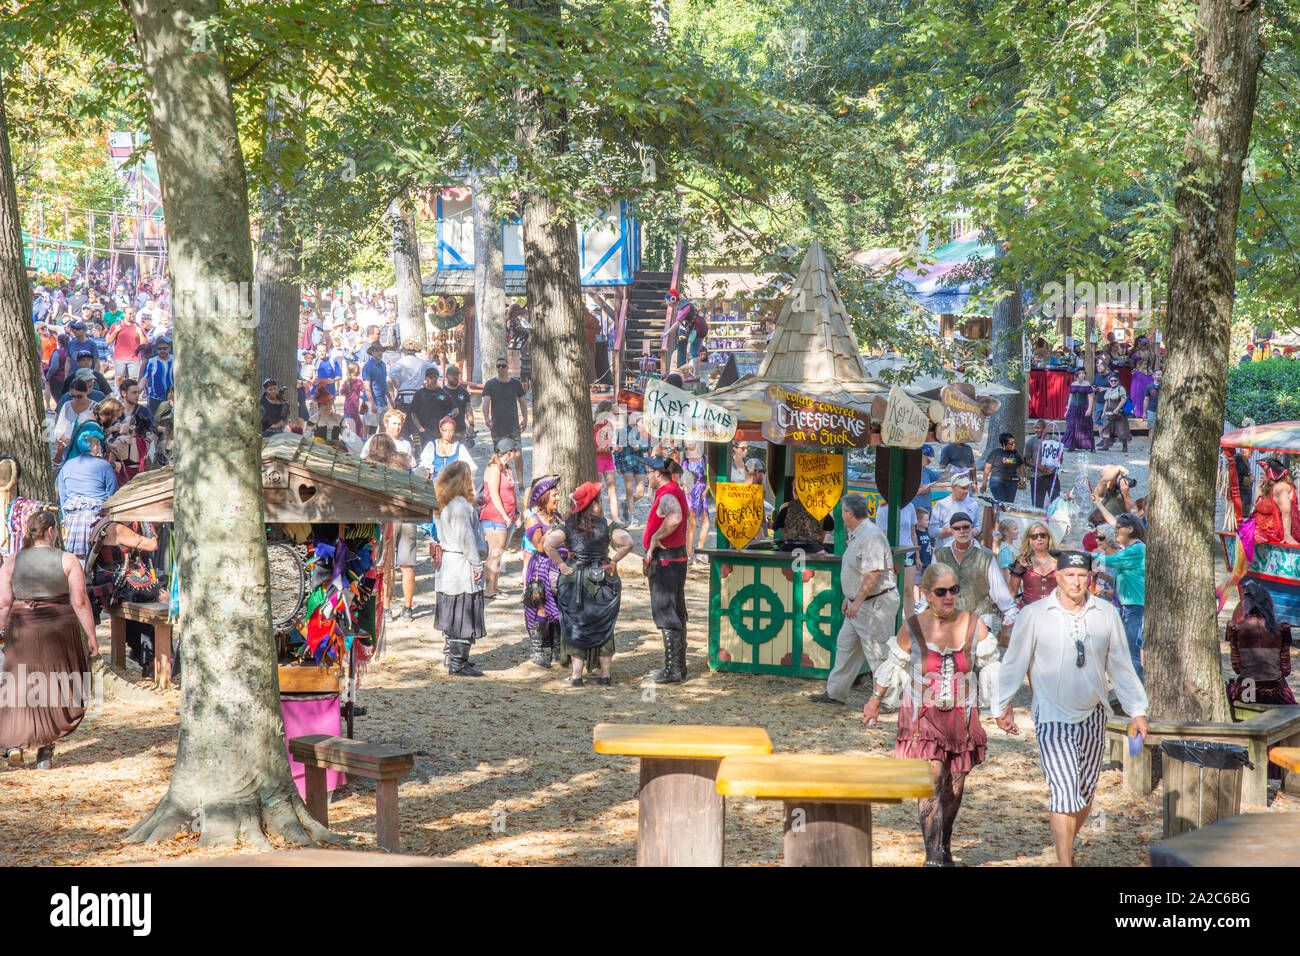 Visitors, some in costume, enjoy the bucolic setting at the annual Maryland Renaissance Festival in Crownsville, MD. Stock Photo